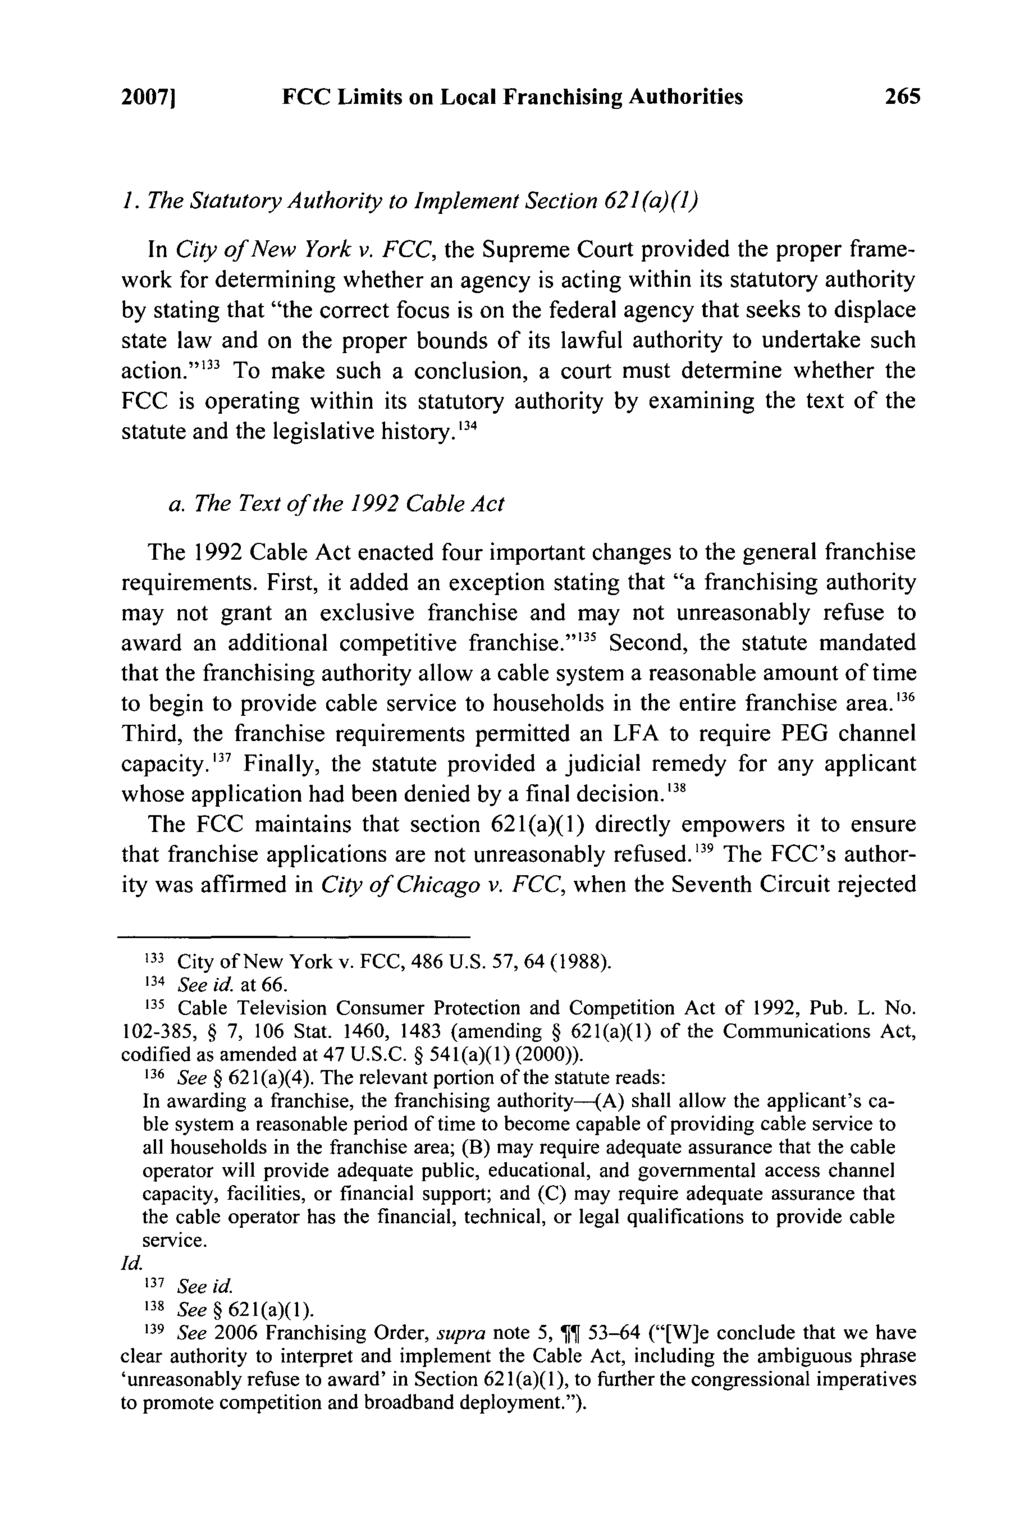 20071 FCC Limits on Local Franchising Authorities 1. The Statutory Authority to Implement Section 621(a)(1) In City of New York v.